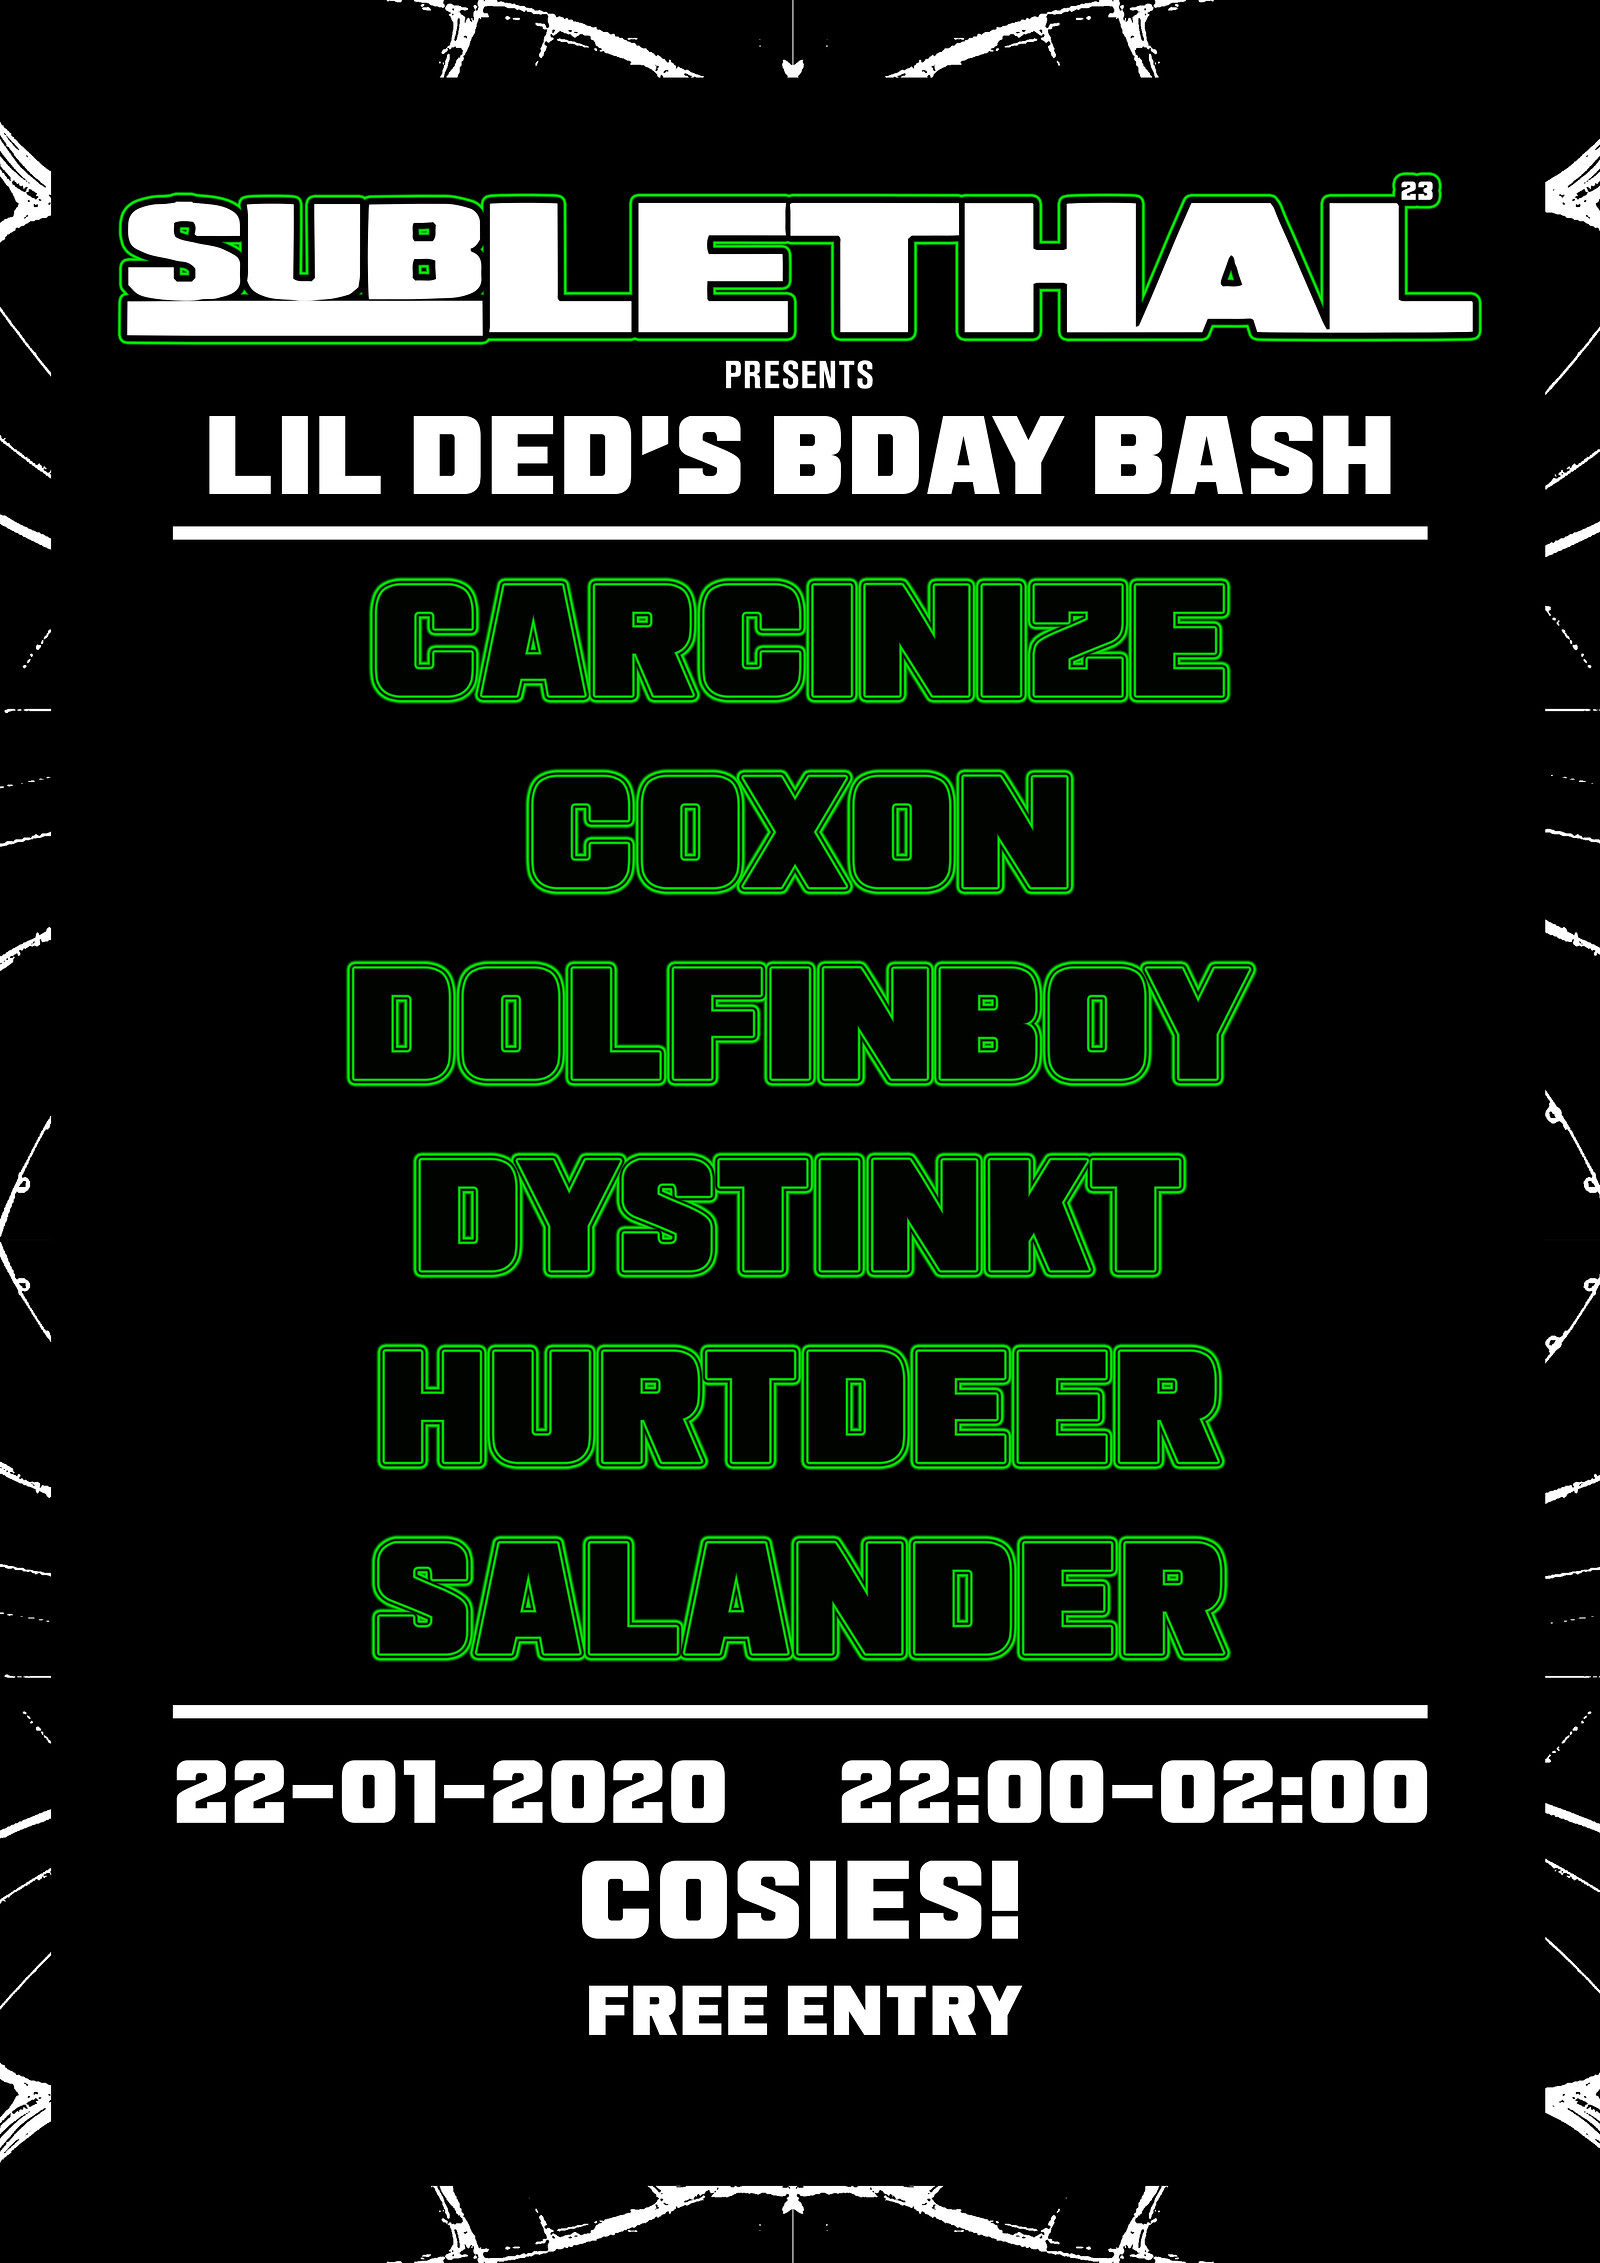 Sublethal: Lil Ded's Bday Bash at Cosies